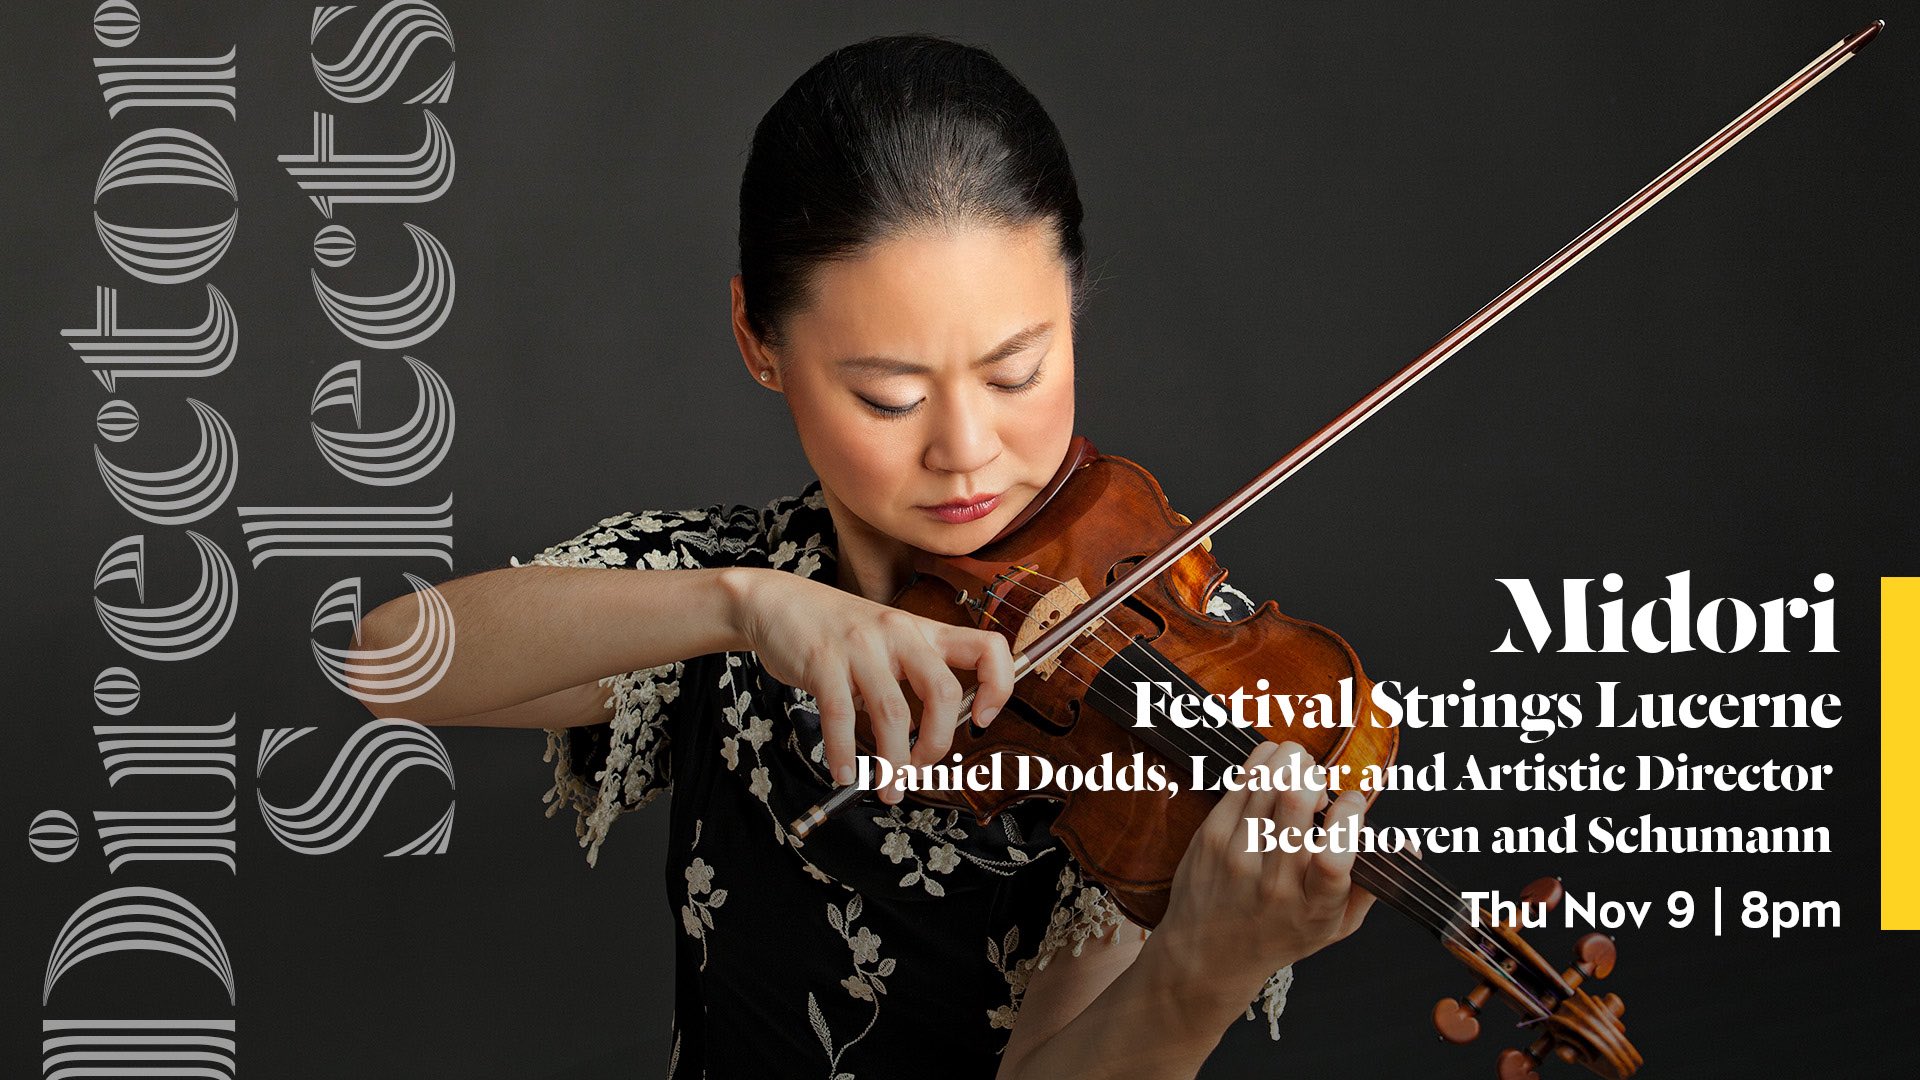 Director Selects Midori Festival Strings Lucerne Danied Dodds, Leader and Artisti Director Beethoven and Schumann Thu Nov 9 | 8pm